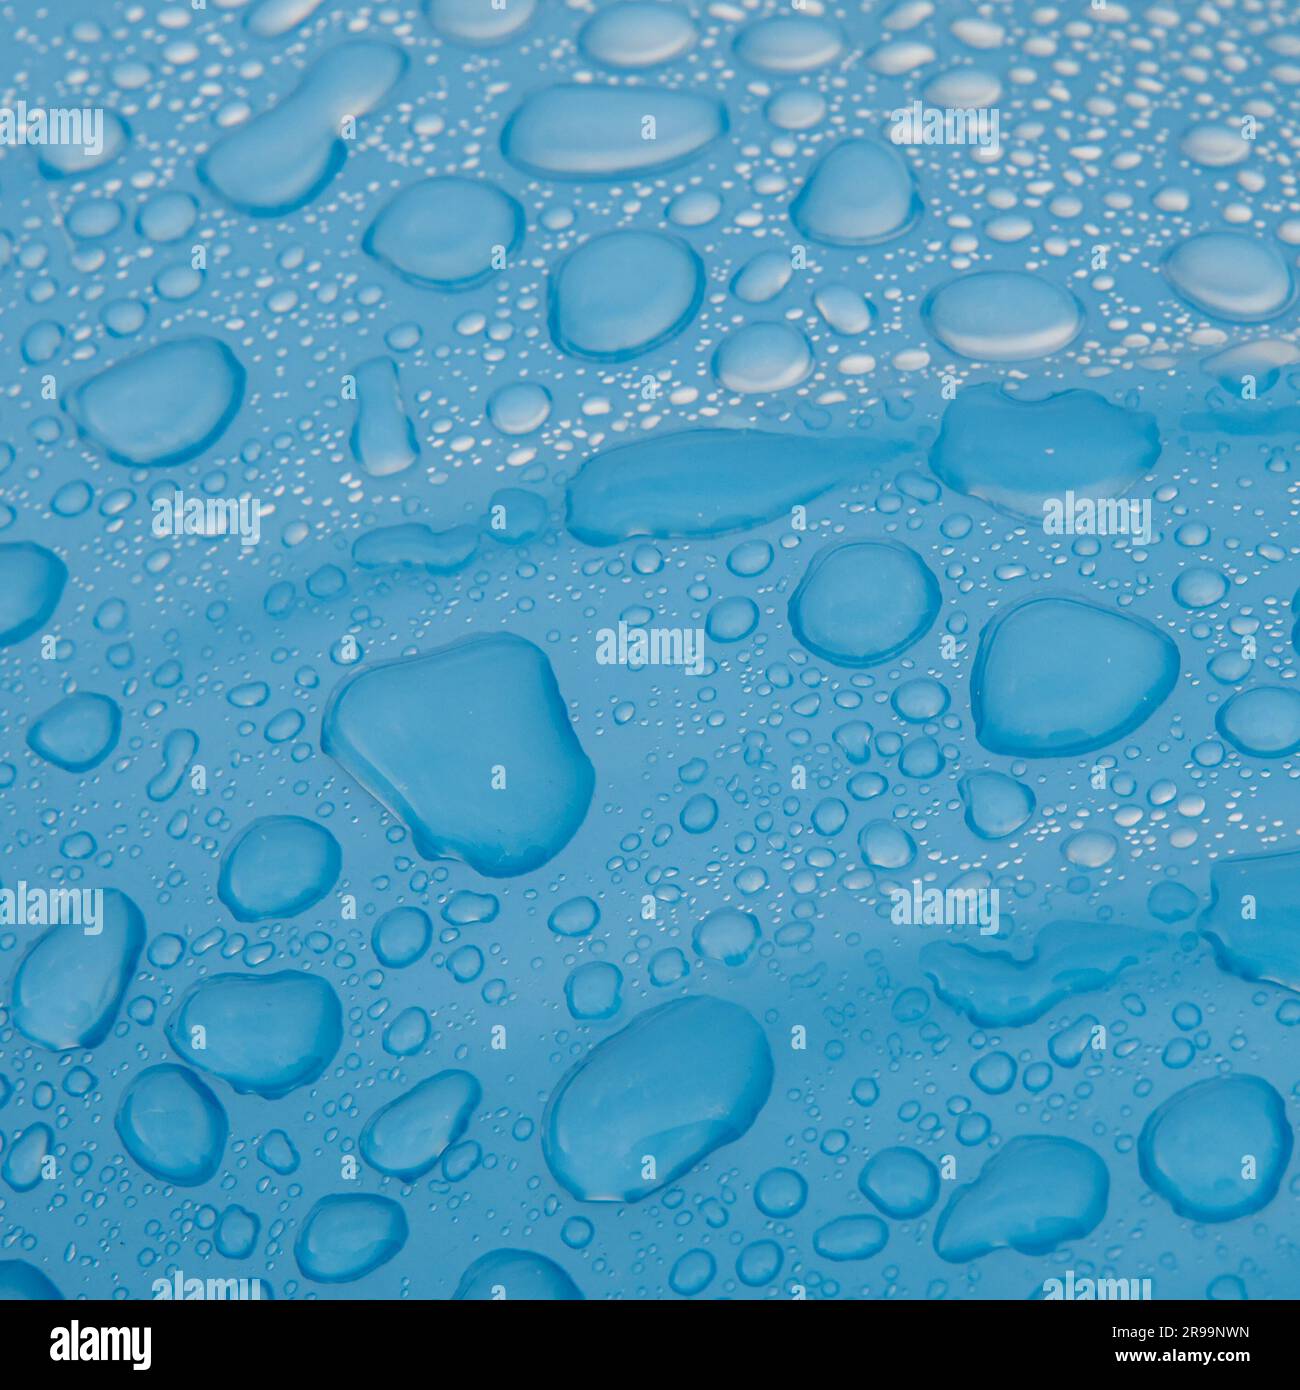 Square image of water drops on shiny blue surface Stock Photo